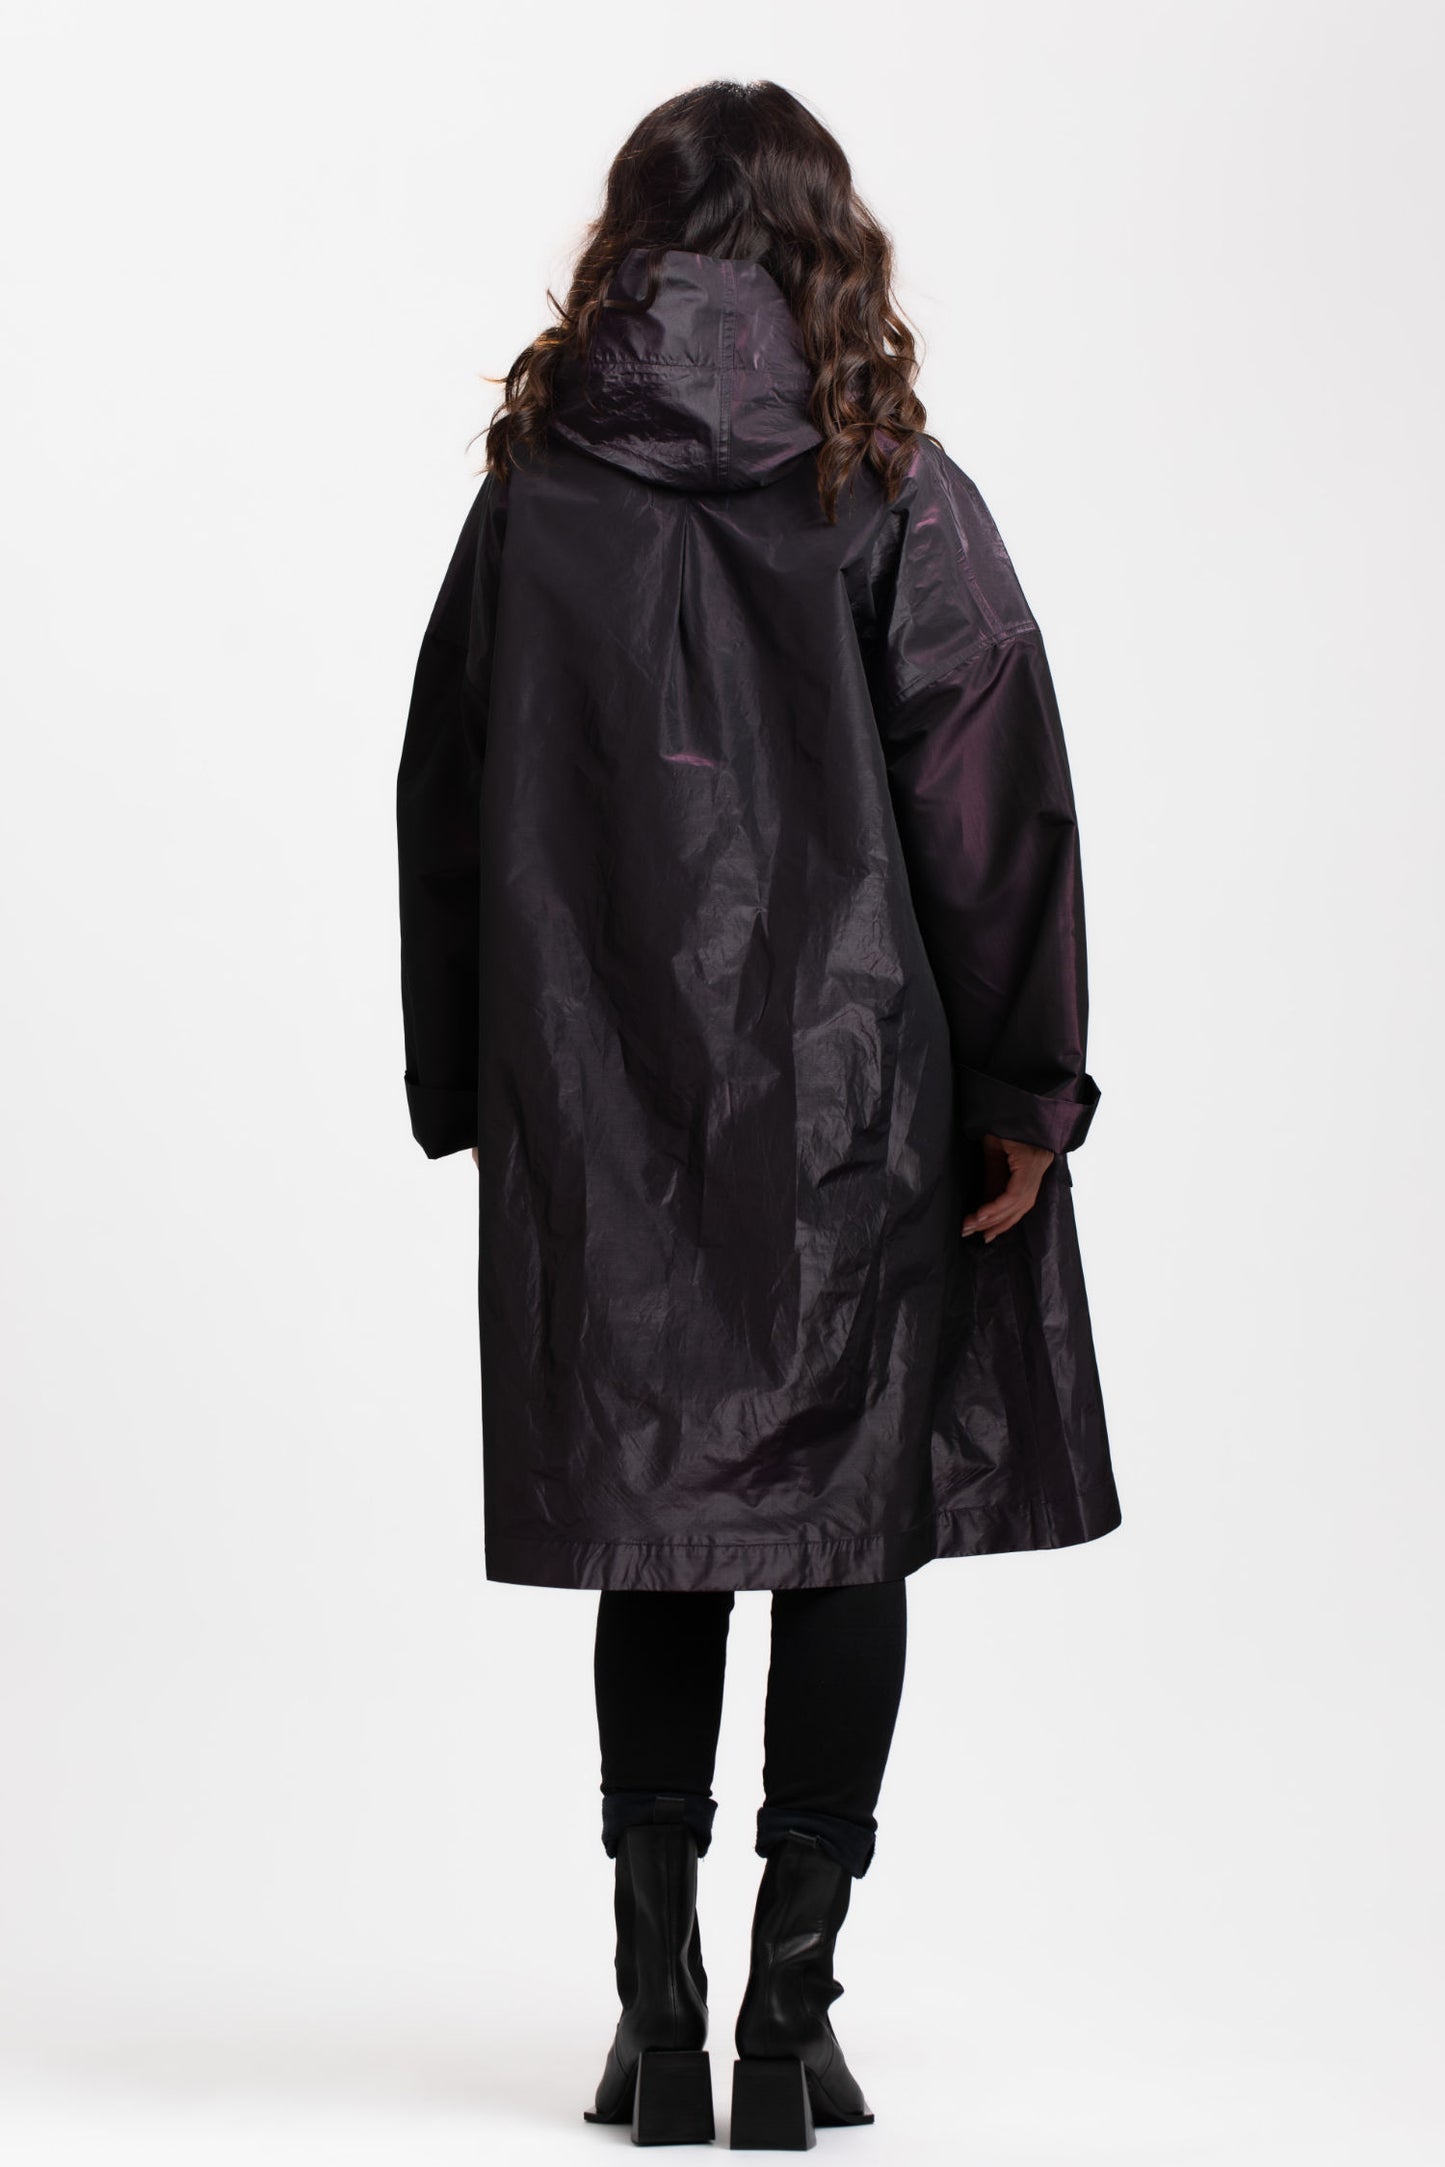 Purple cape coat made of recycled materials by RAFFAUF